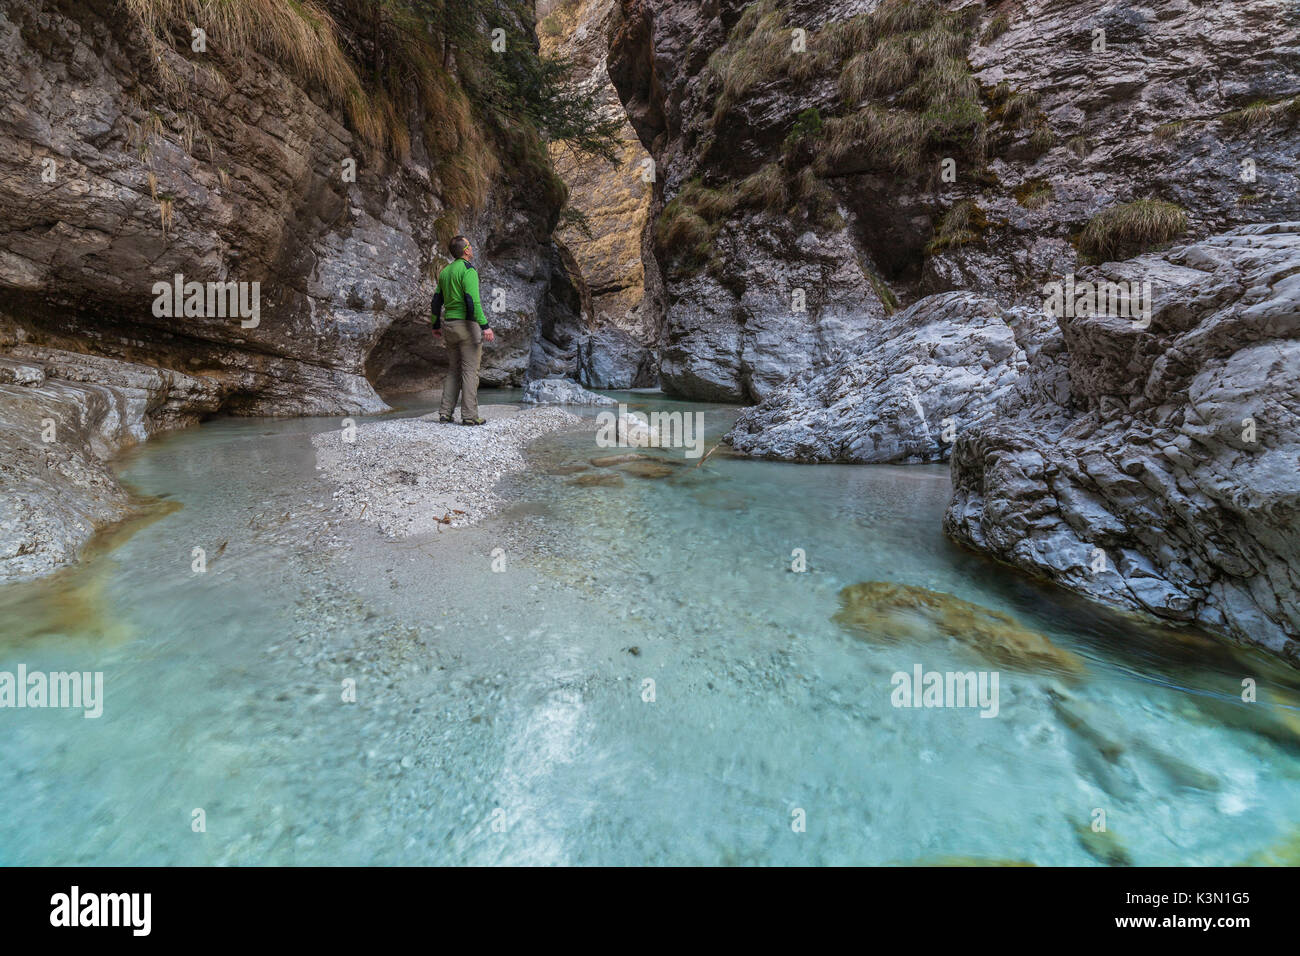 Dolomites, Belluno, Veneto, Italy. An hiker looking the turquoise water in Val Soffia, Mis valley Stock Photo